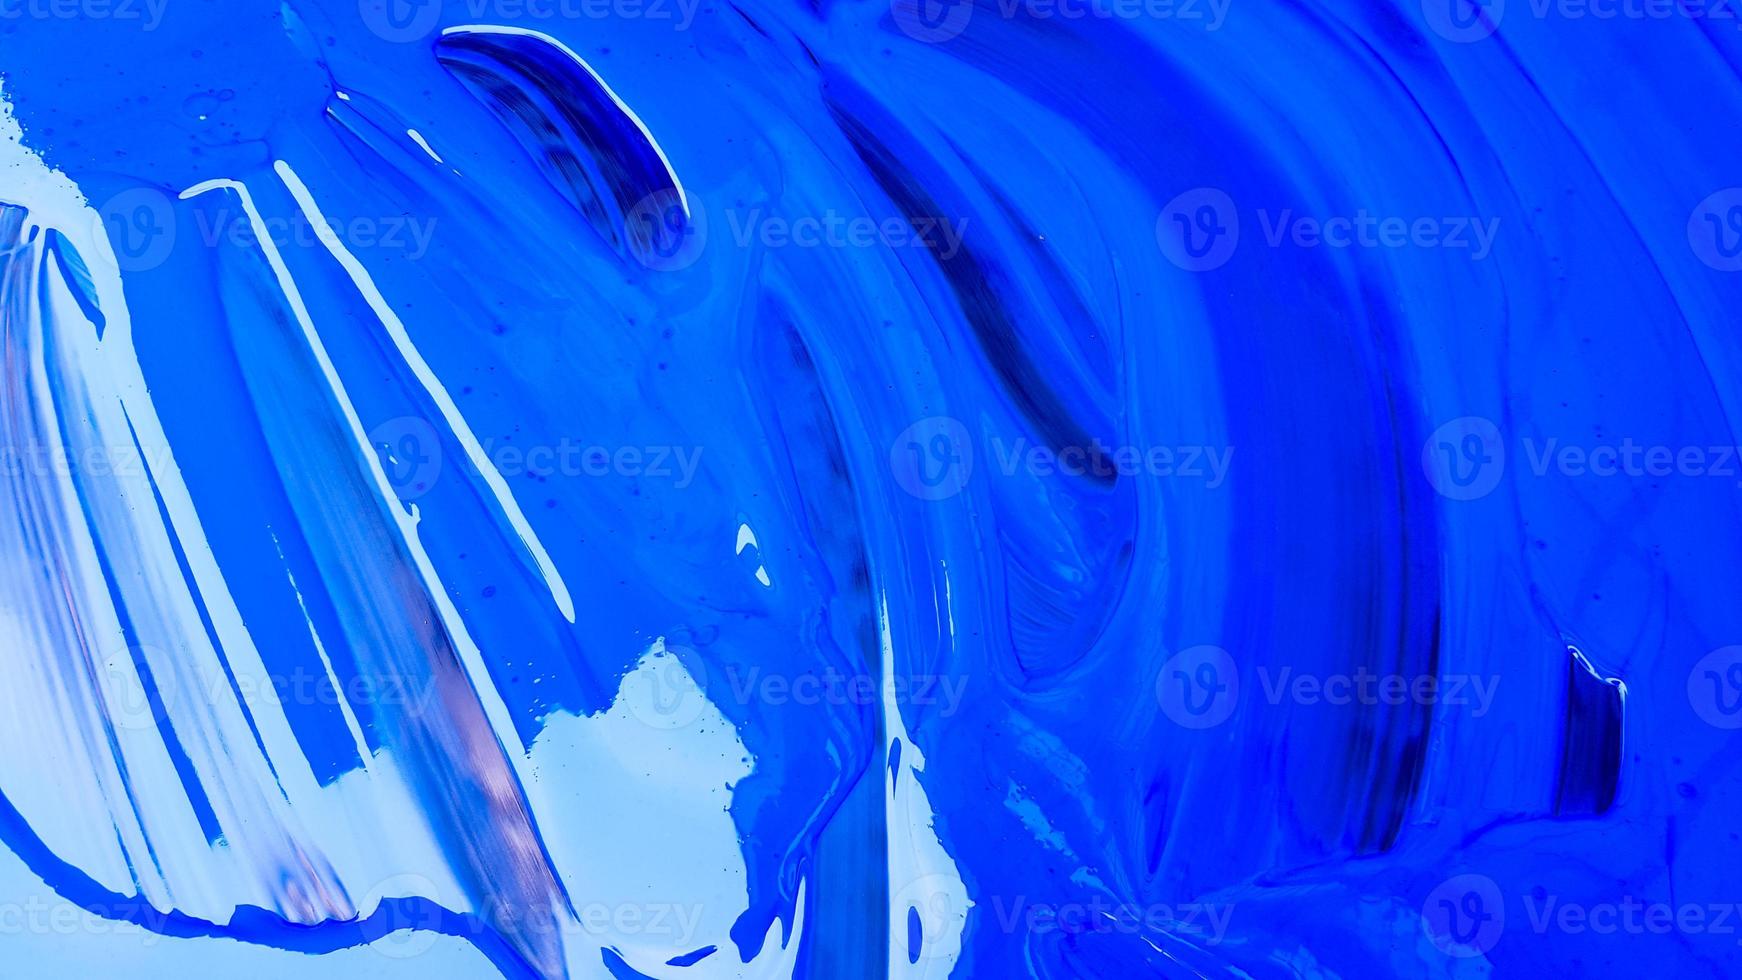 Abstract background of spilled blue paint with buckets on a black background. Blue paint is pouring on a black background. Use it for an artist or creative concept. Paints spilled blue background photo